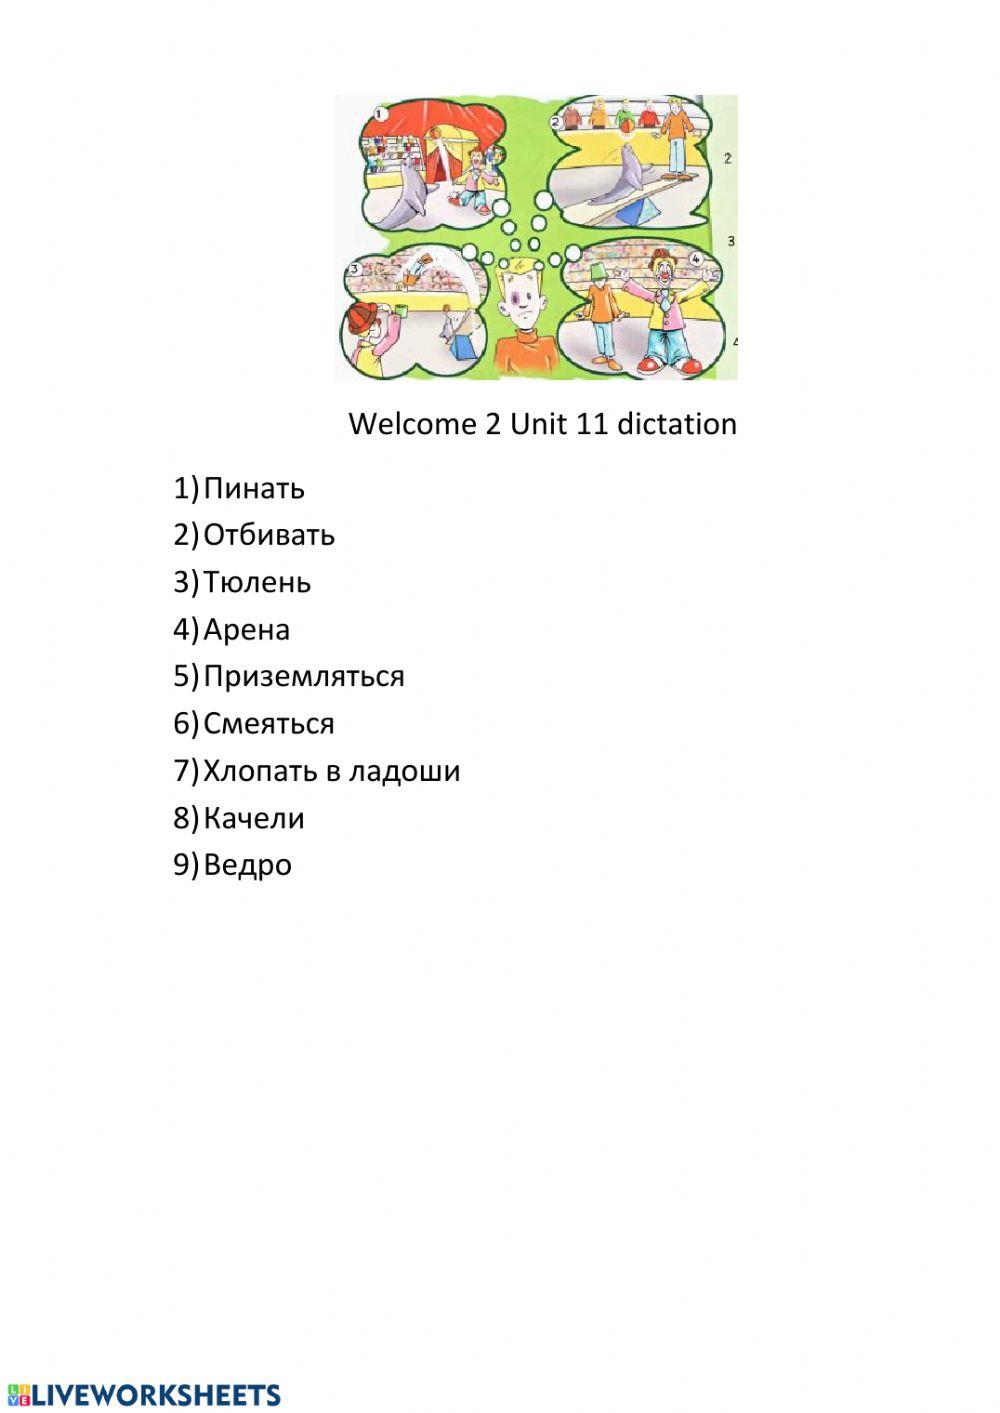 Welcome 2 Unit 11 Lesson 2